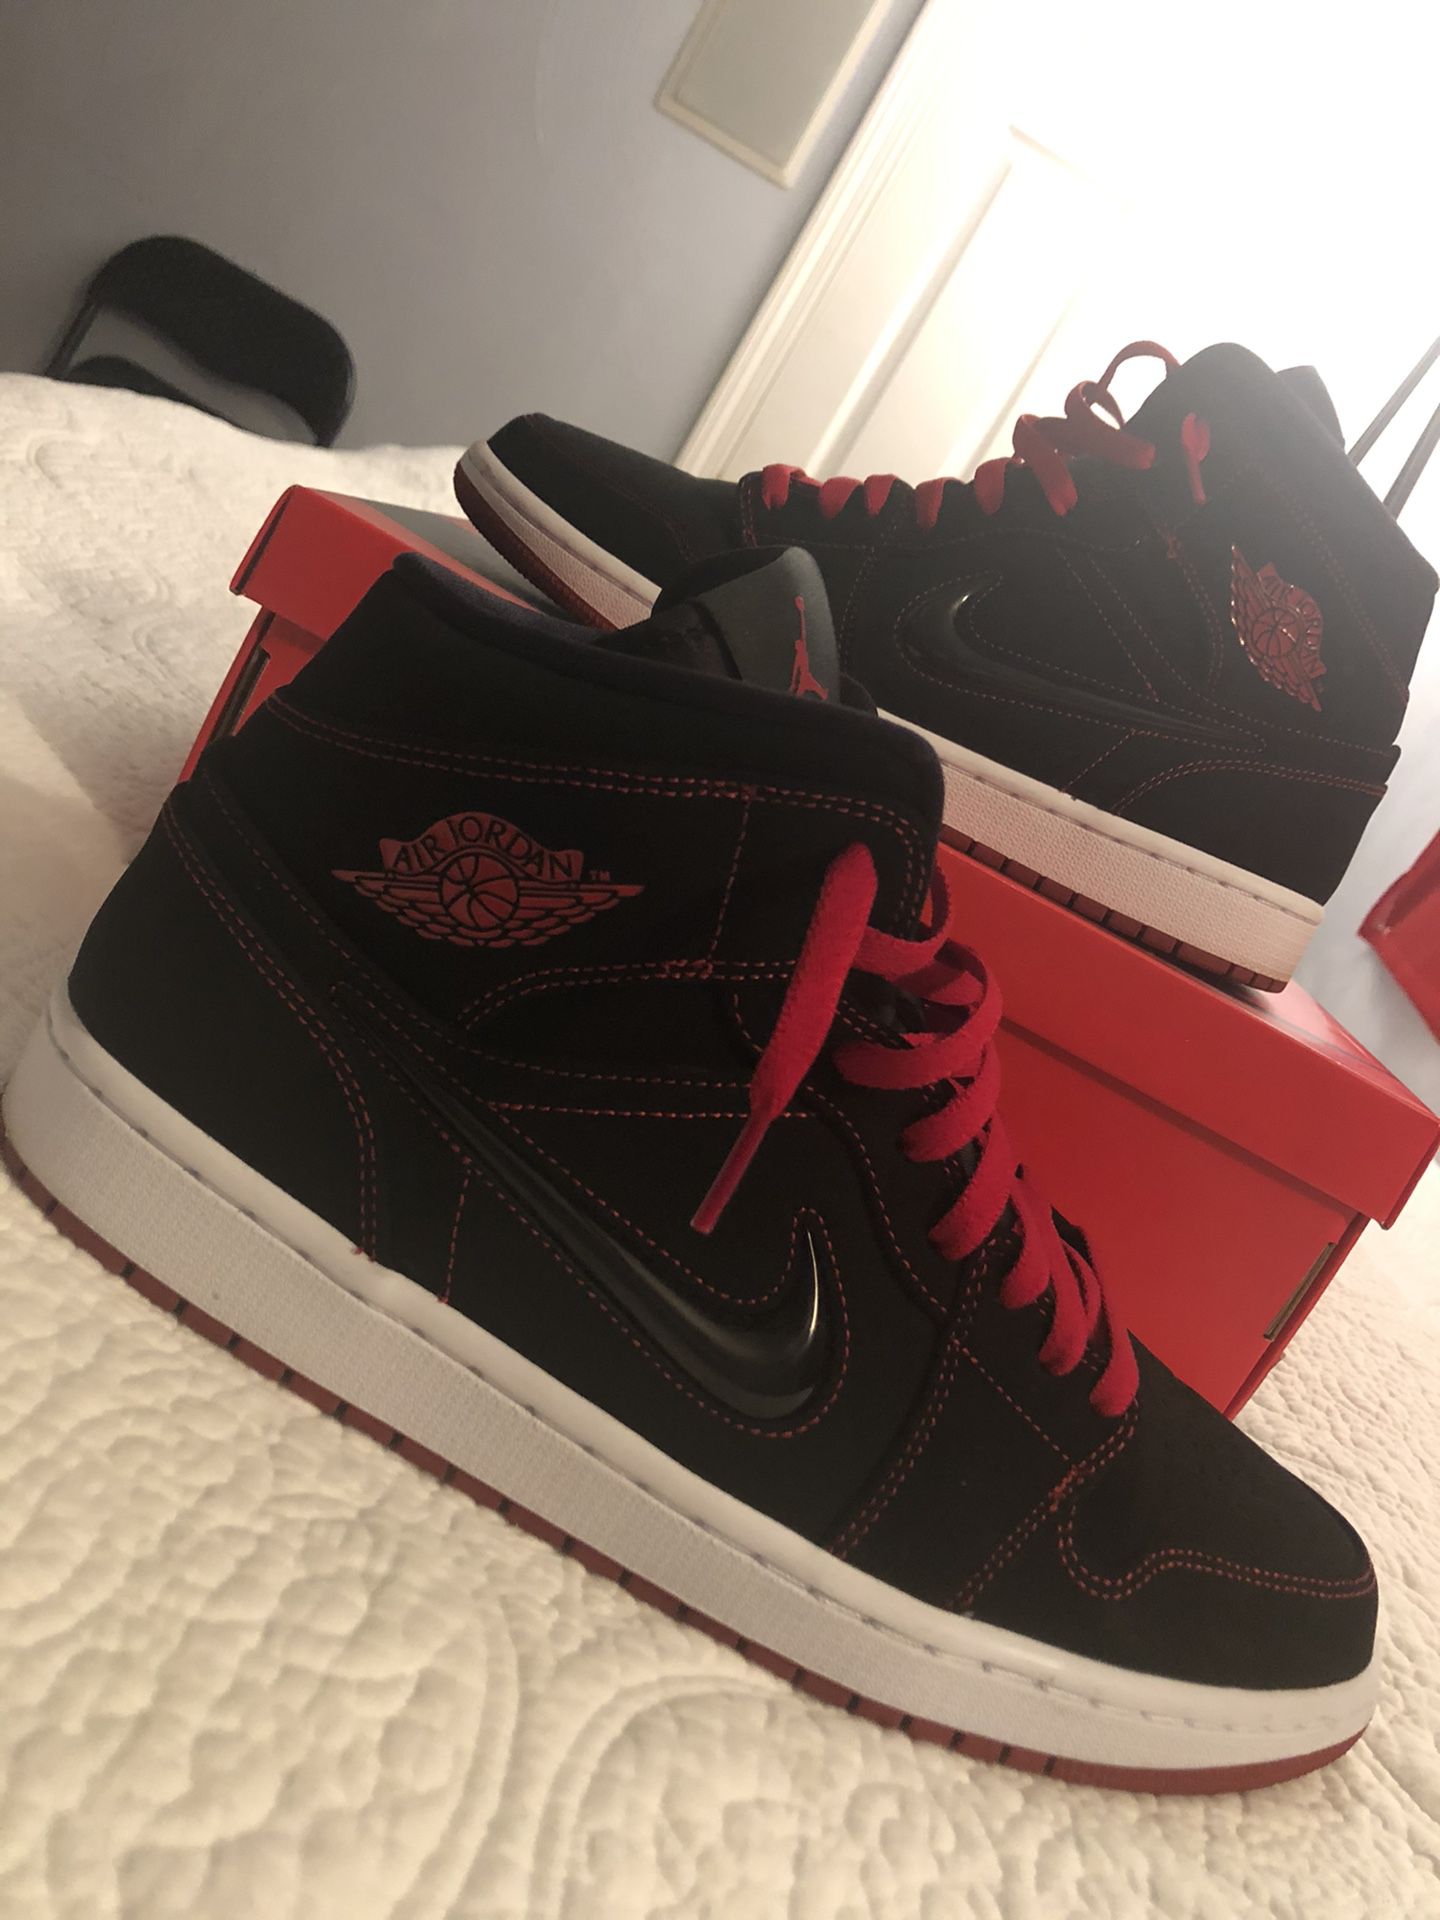 Jordan 1 Mid “Come Fly With Me”